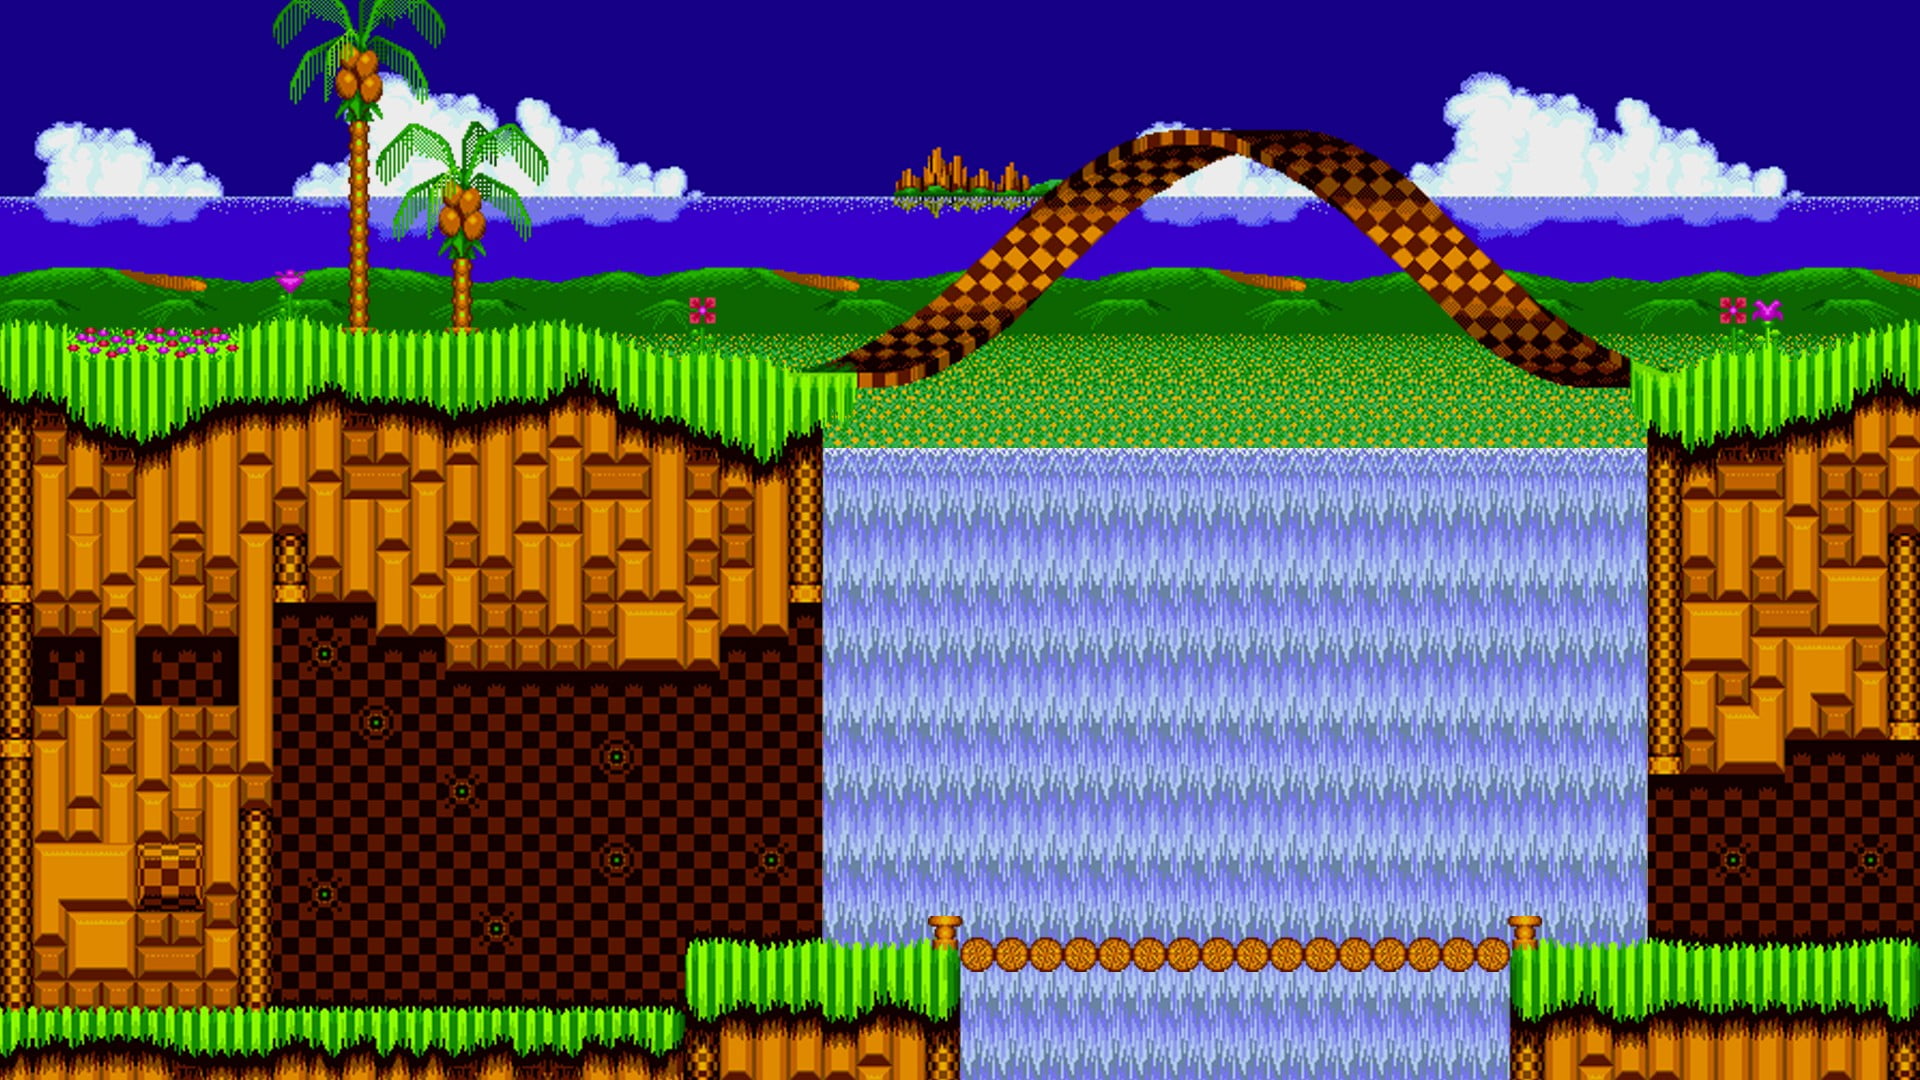 green hill zone background sprites - Google Search  Sonic birthday  parties, Sonic and shadow, I love games